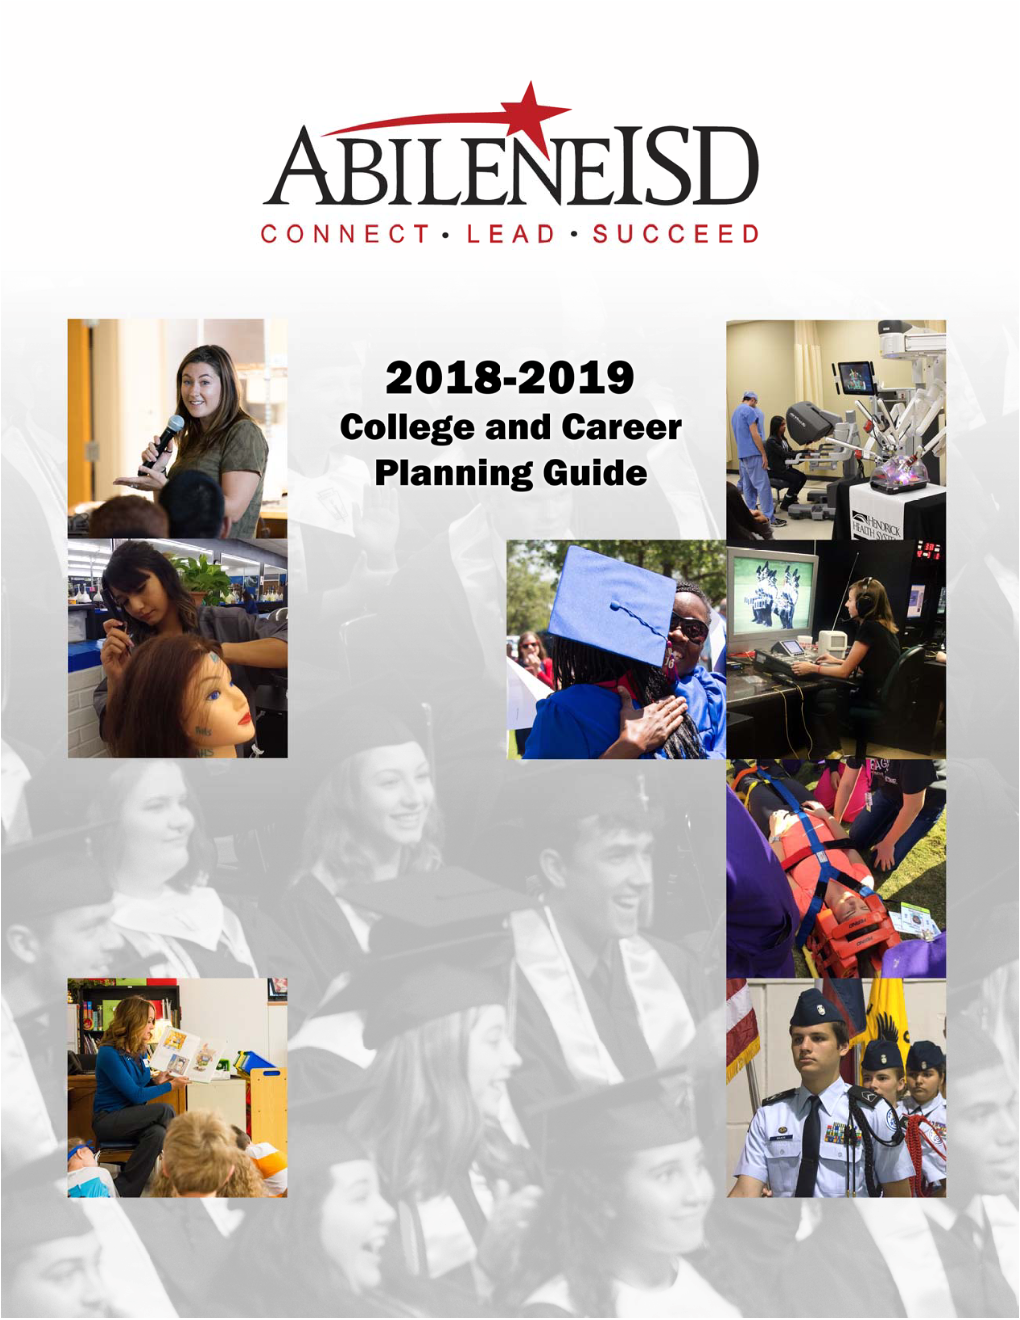 2018-2019 College and Career Planning Guide